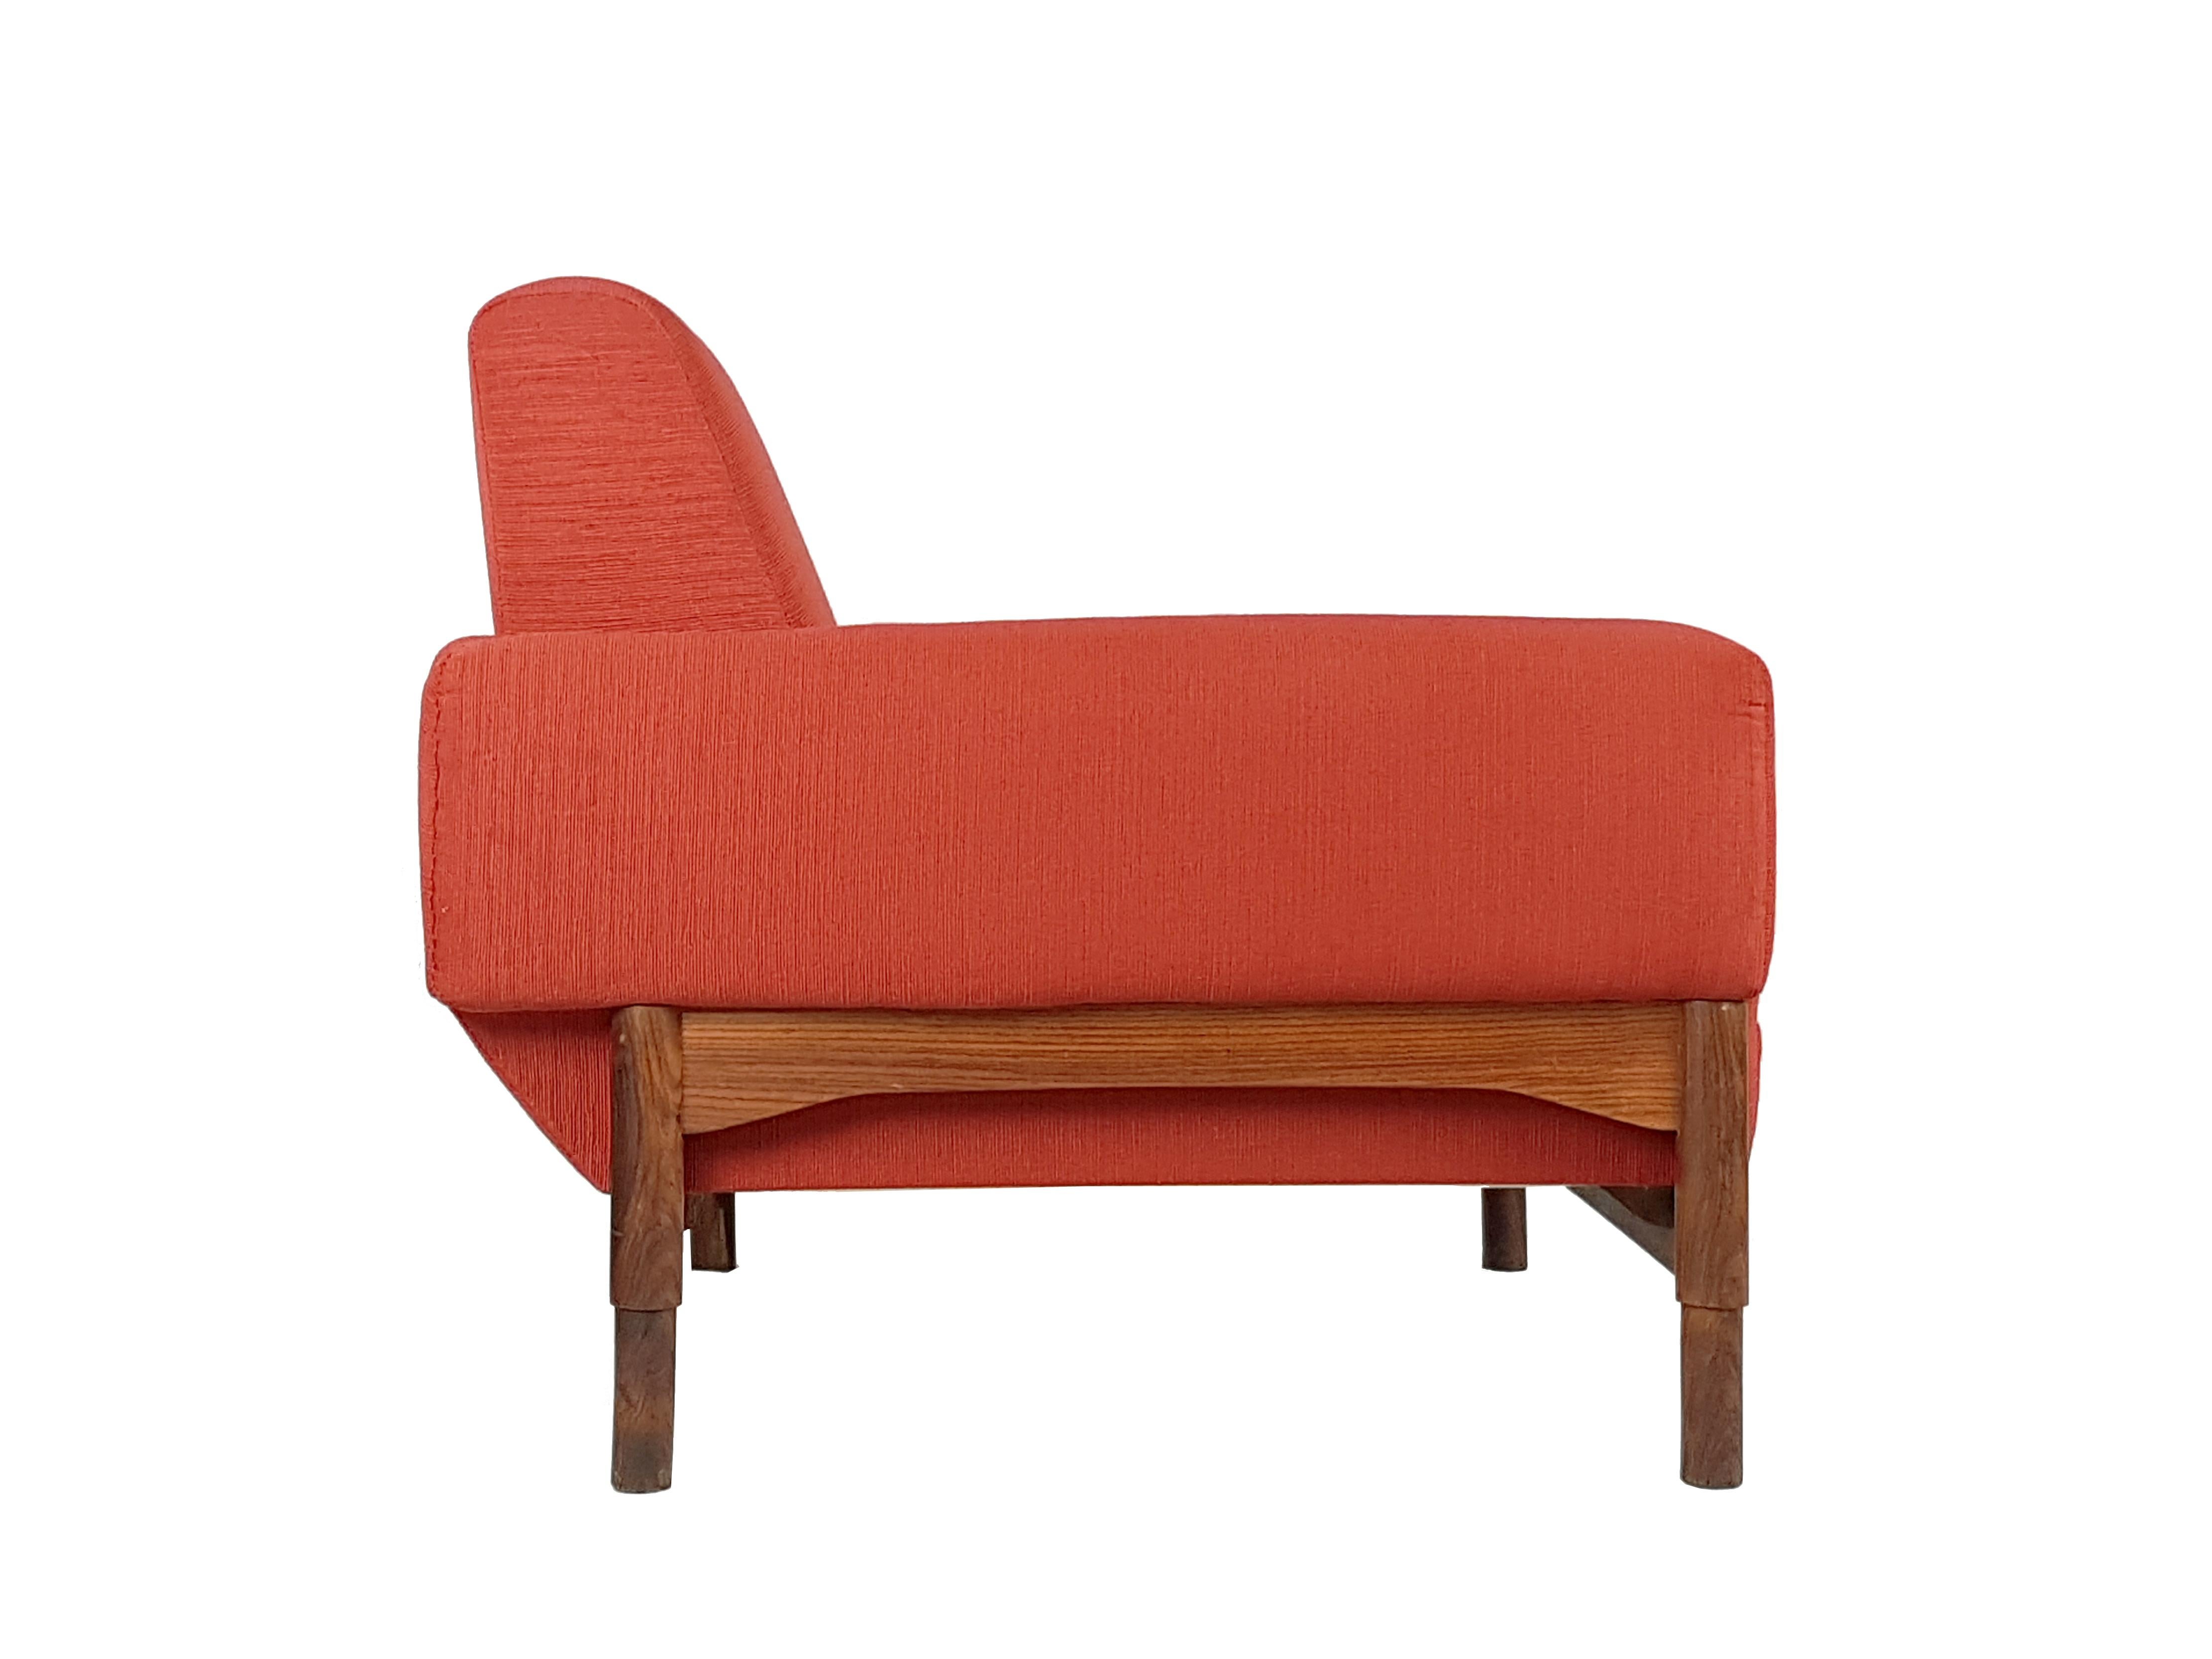 Mid-20th Century Pair of Wood & Brick Red Fabric 1960 Armchair by S. Saporiti for F.Lli Saporiti For Sale